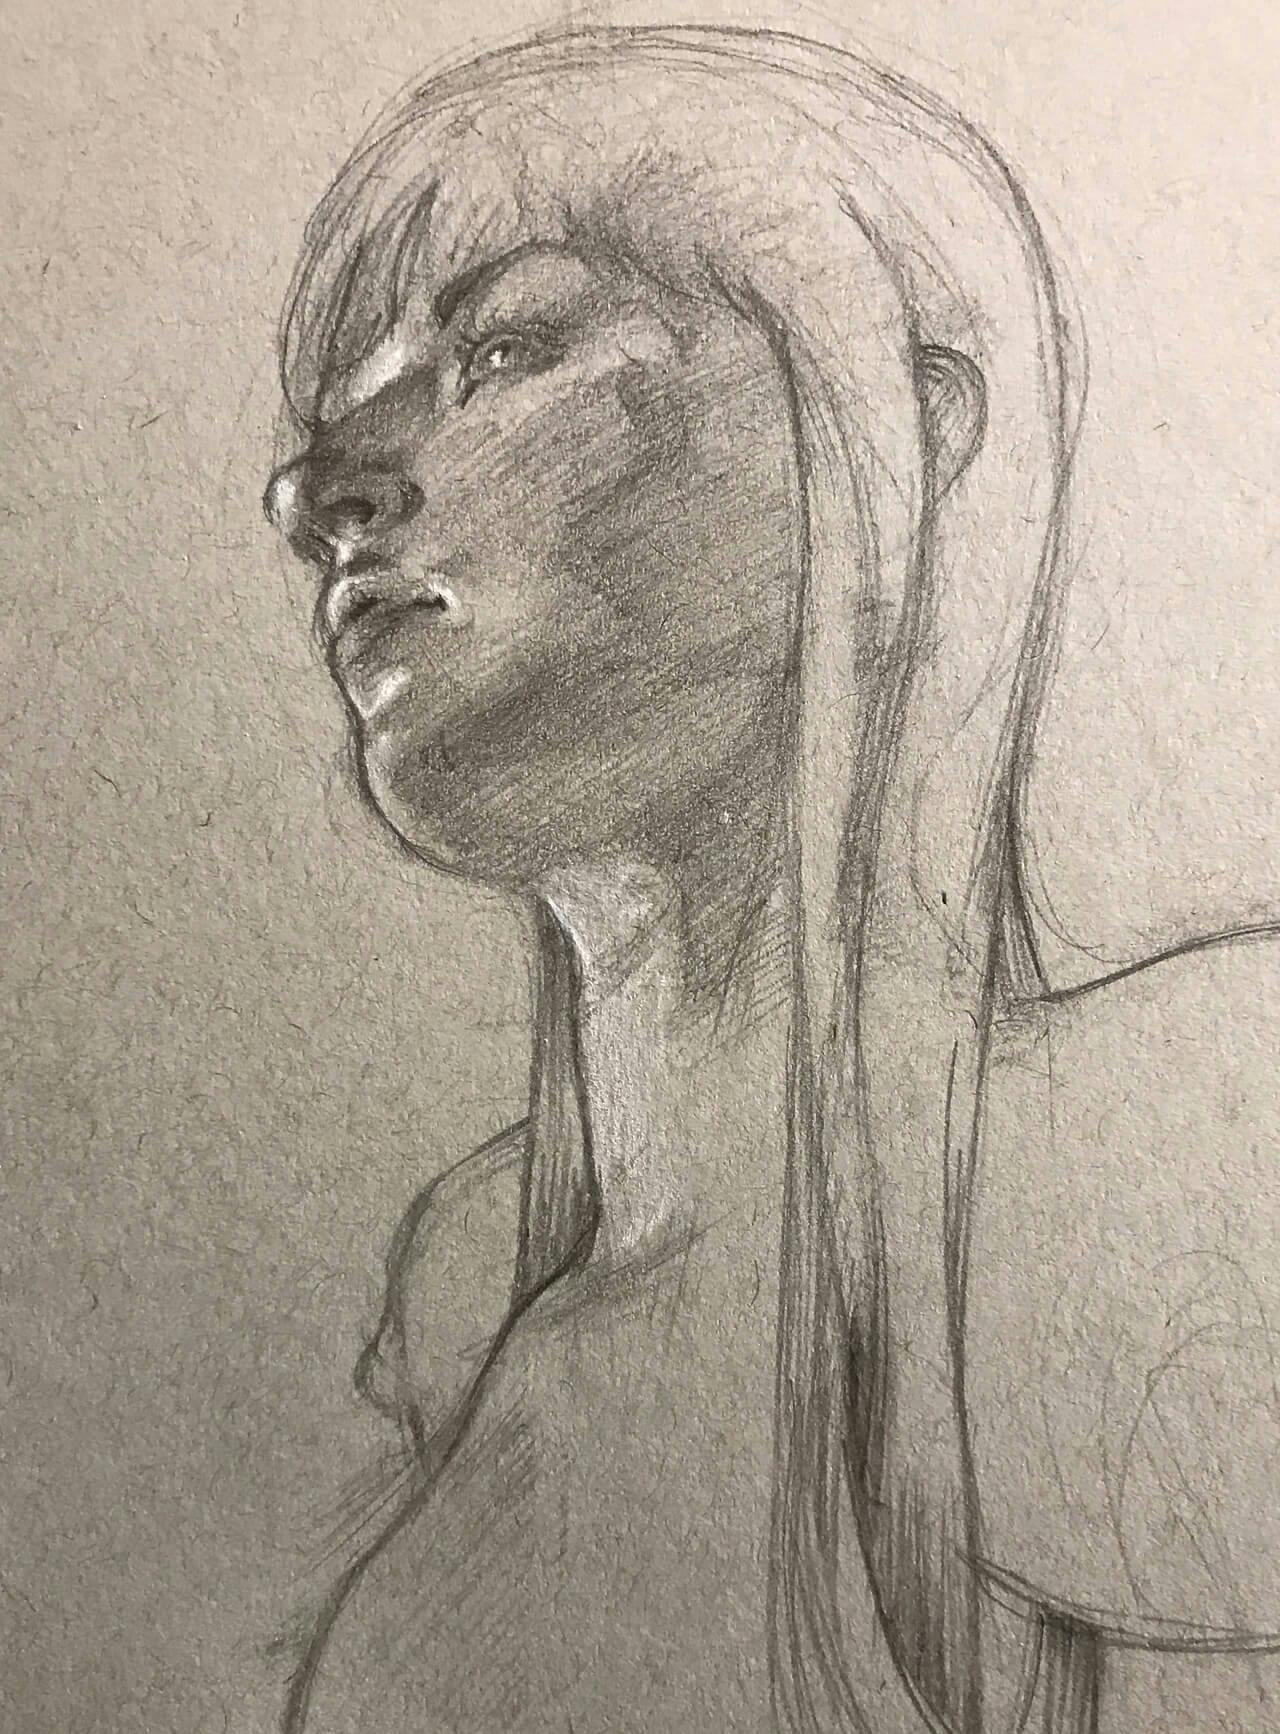 Graphite sketch, looking up at a woman in profile